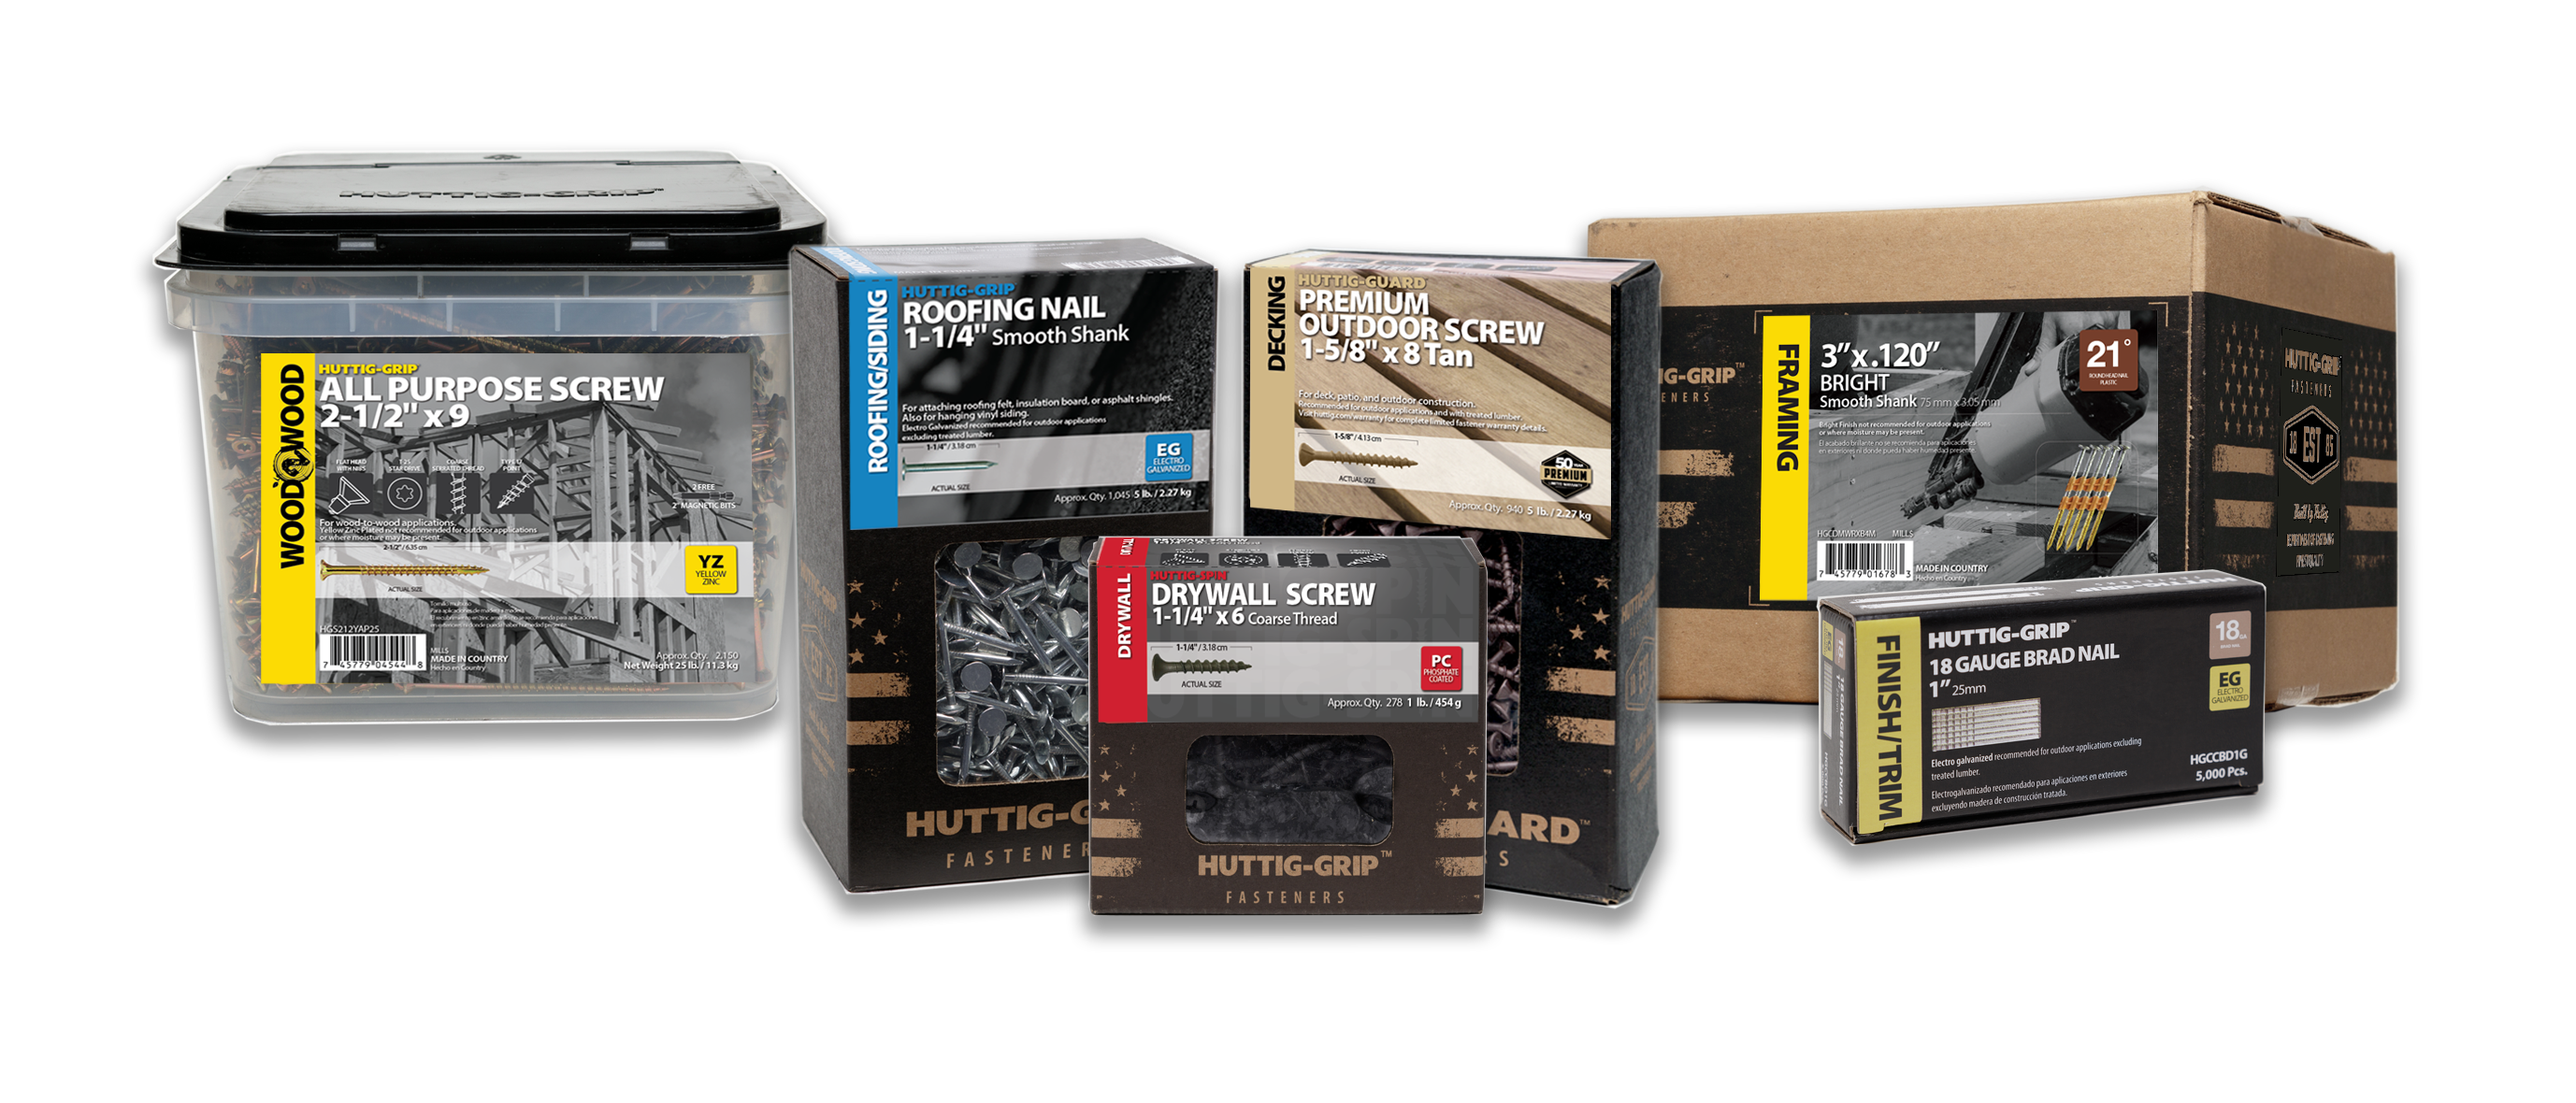 Huttig-Grip Fasteners: Now A Part of Woodgrain's Family of Brands -  Woodgrain